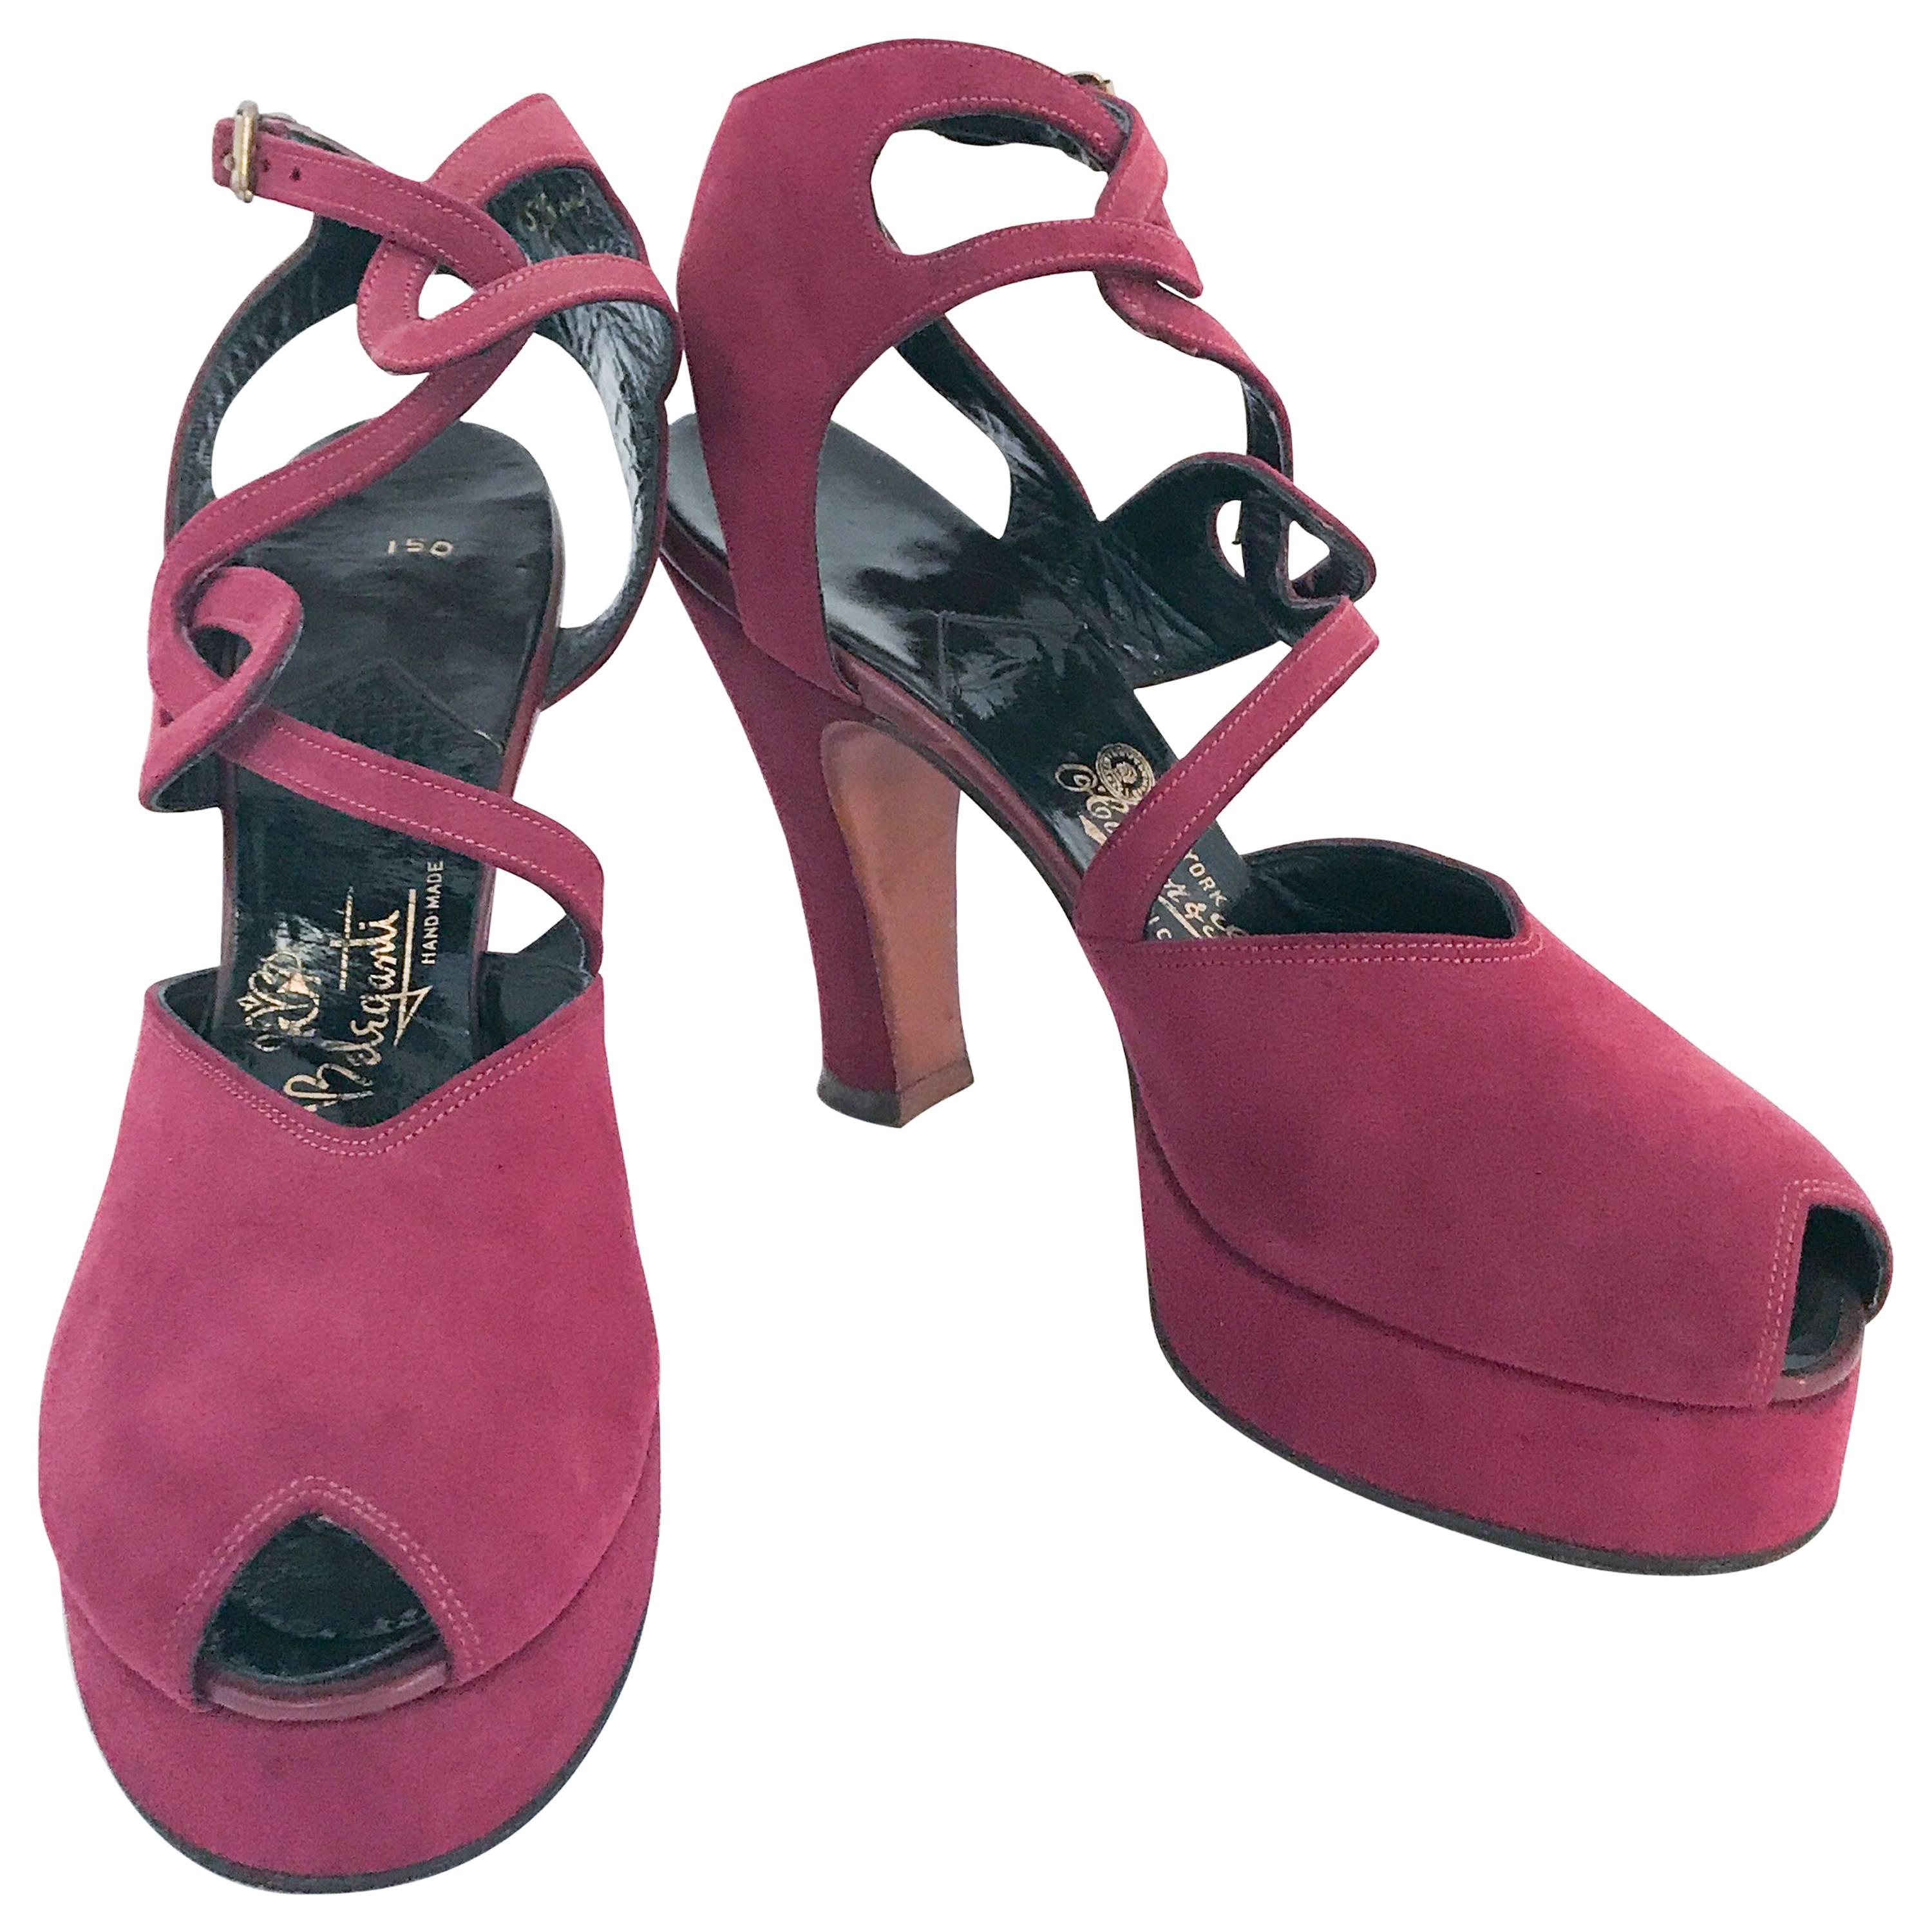 1947 Plum Suede Heels With Strap and Cut-out Accents For Sale